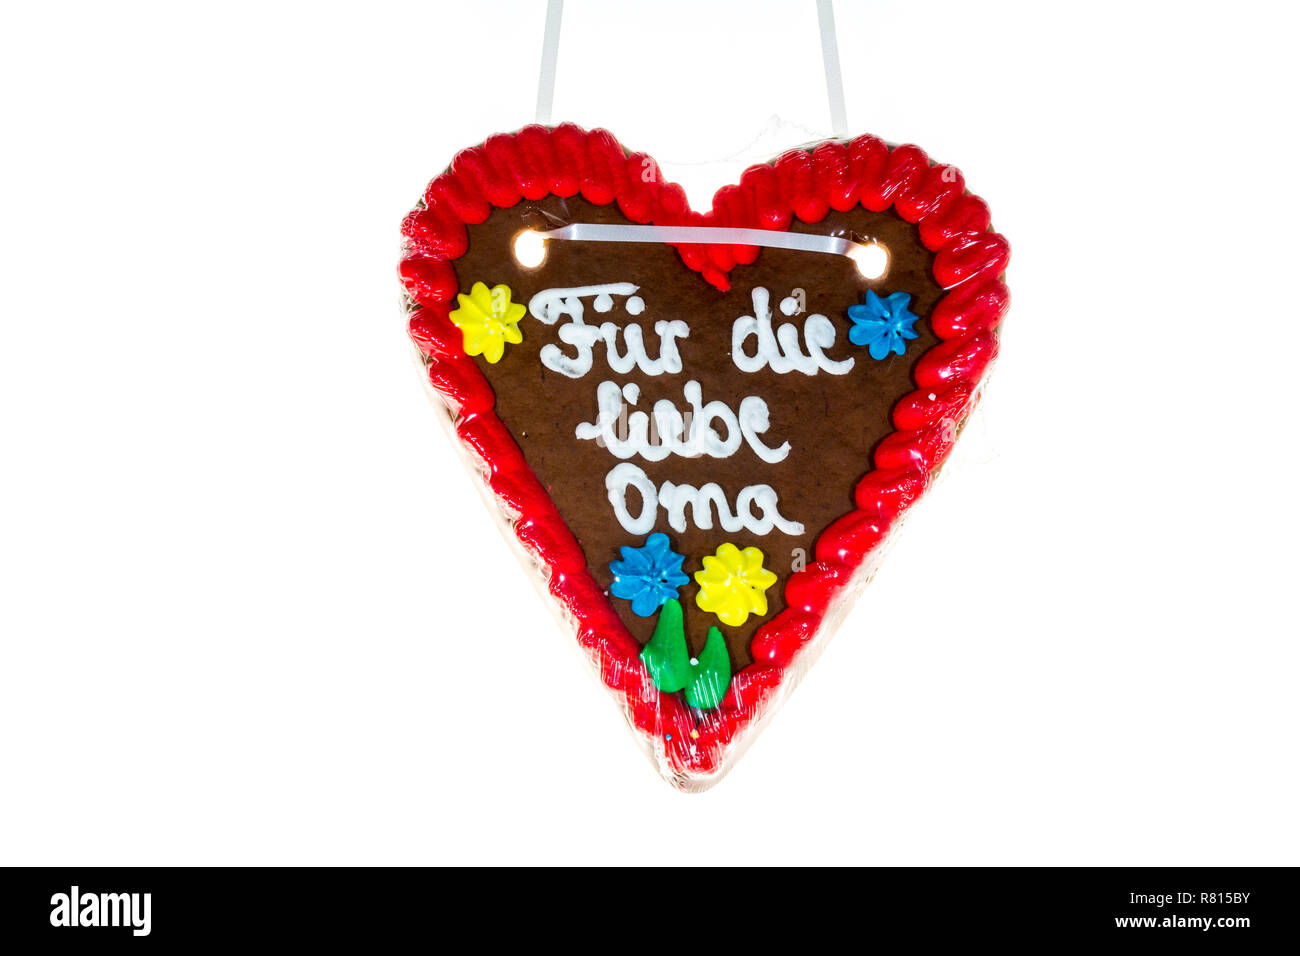 Gingerbread heart with the writing 'Fuer die liebe Oma', German for 'to dear granny' Stock Photo